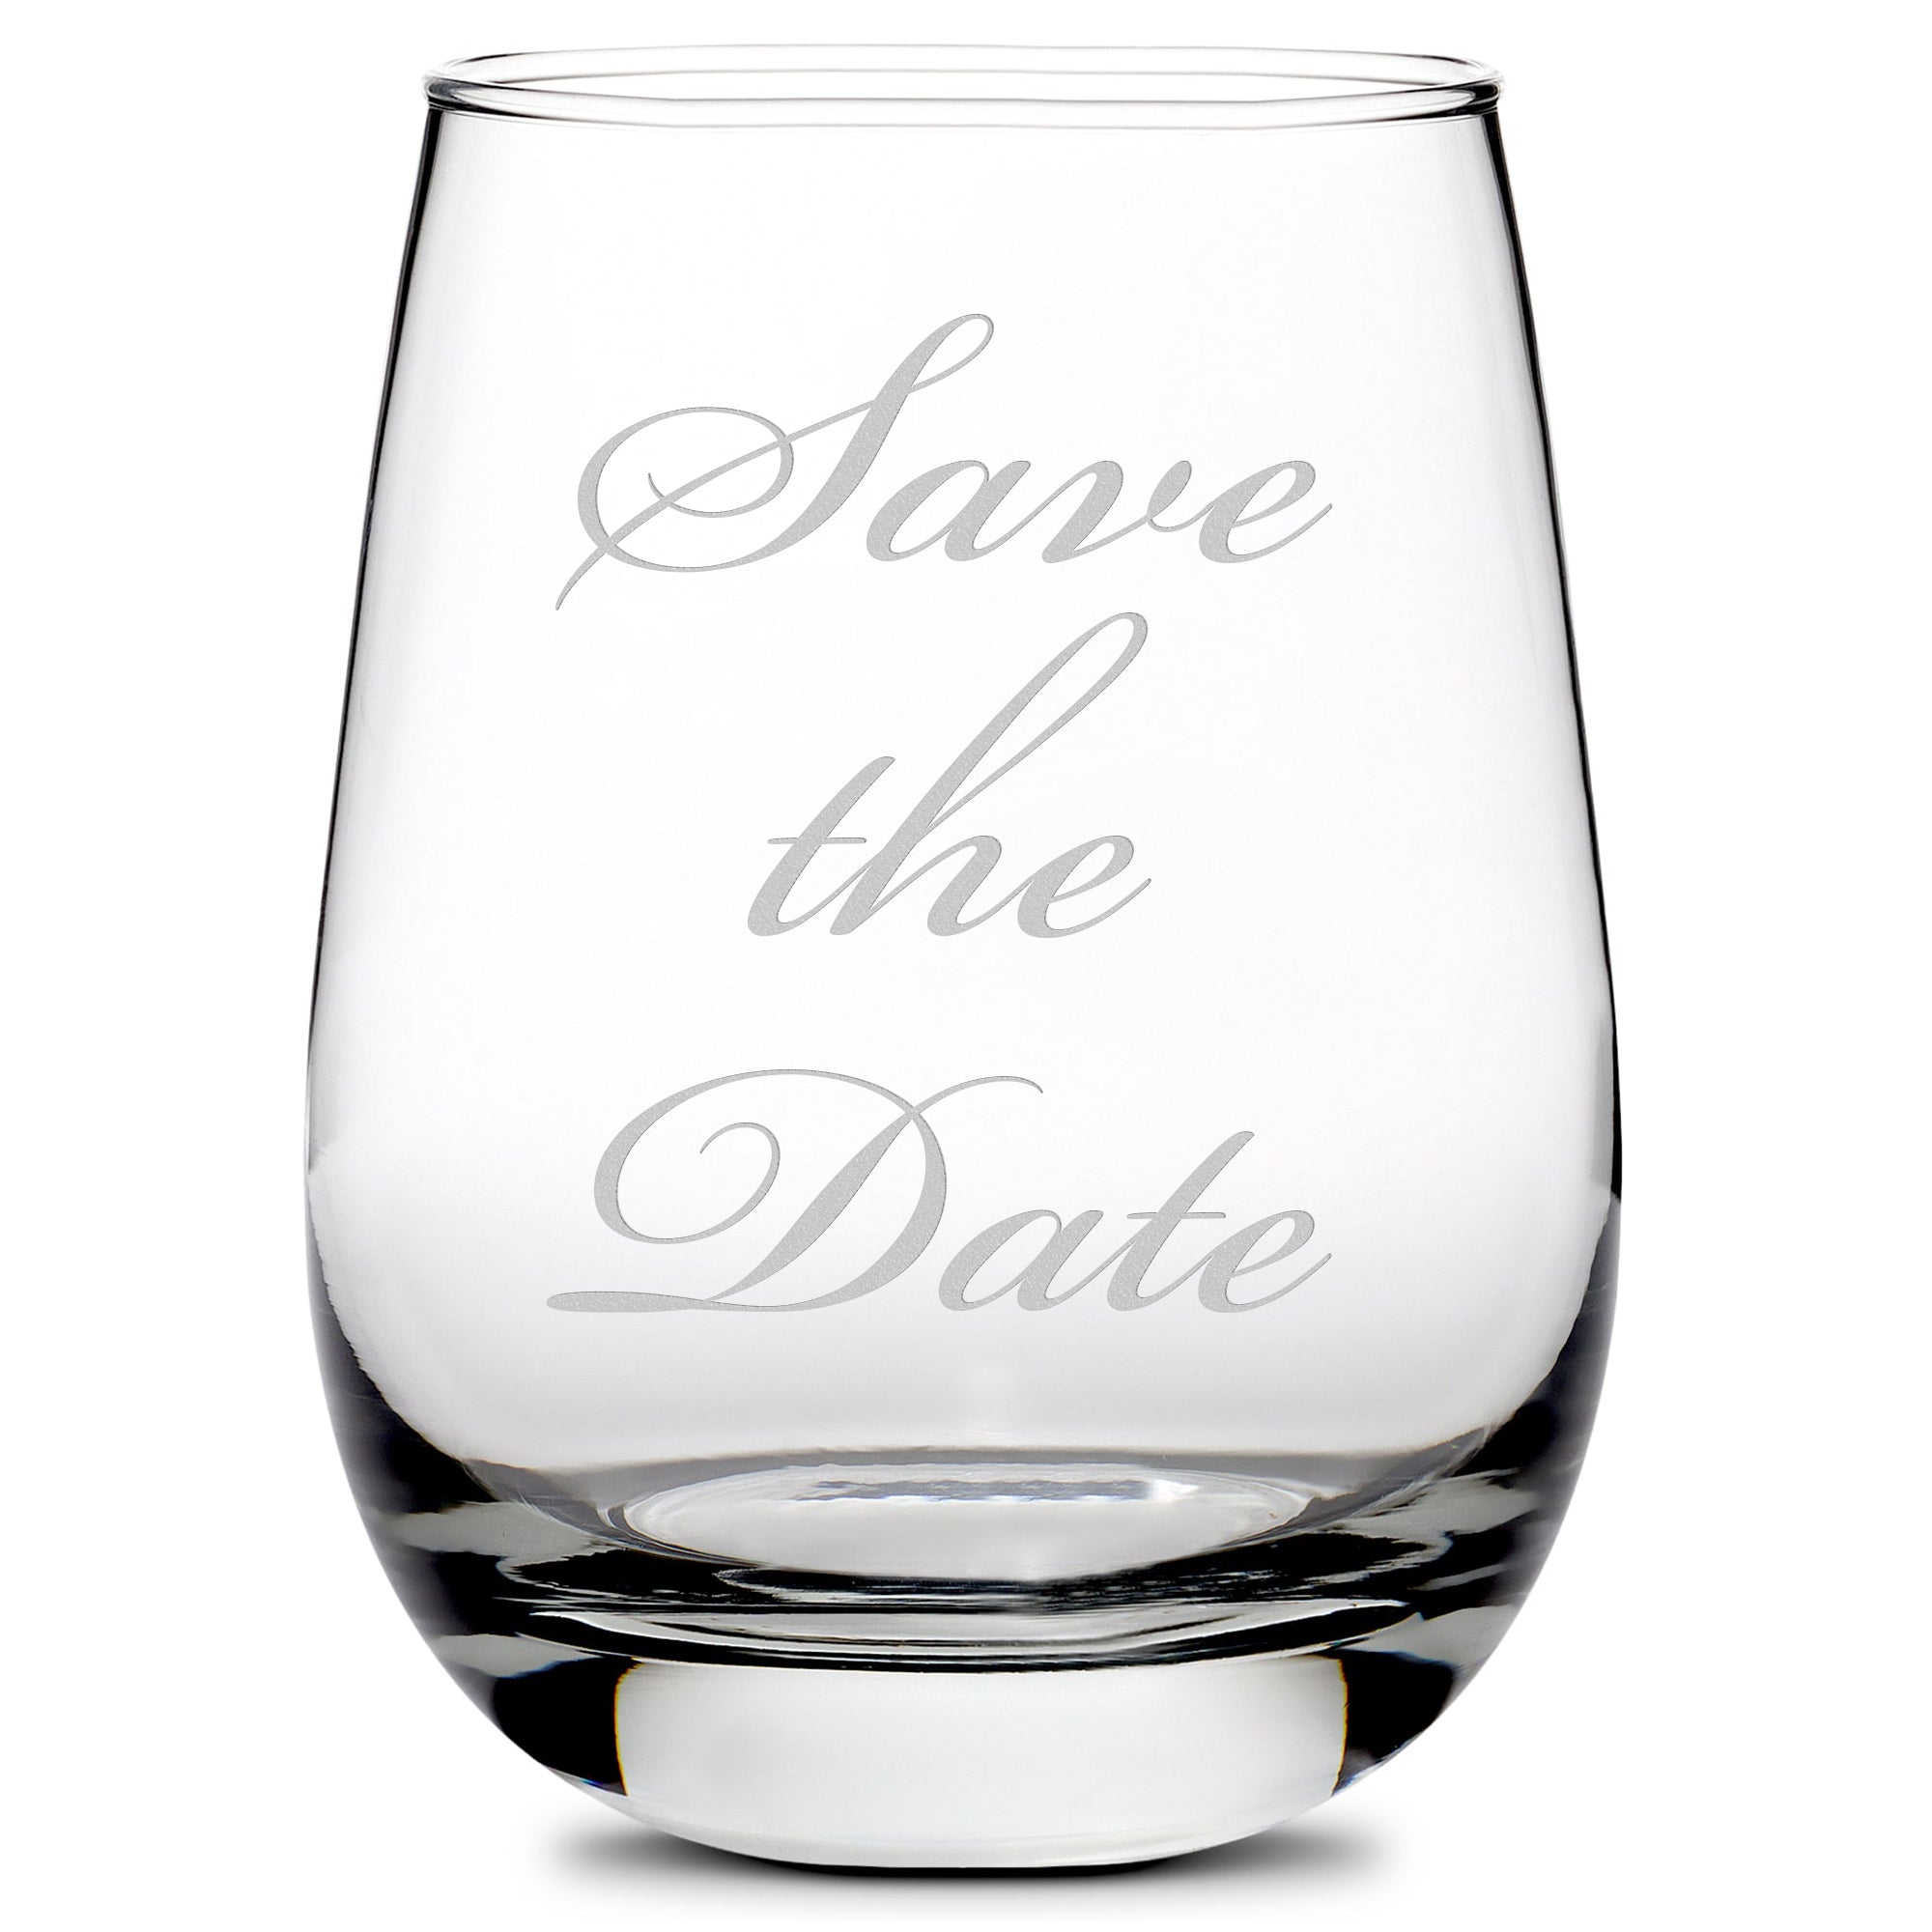 Integrity Bottles, Stemless Wine Glass, Save the Date, Handmade, Handblown, Hand Etched Gifts, Sand Carved 16oz